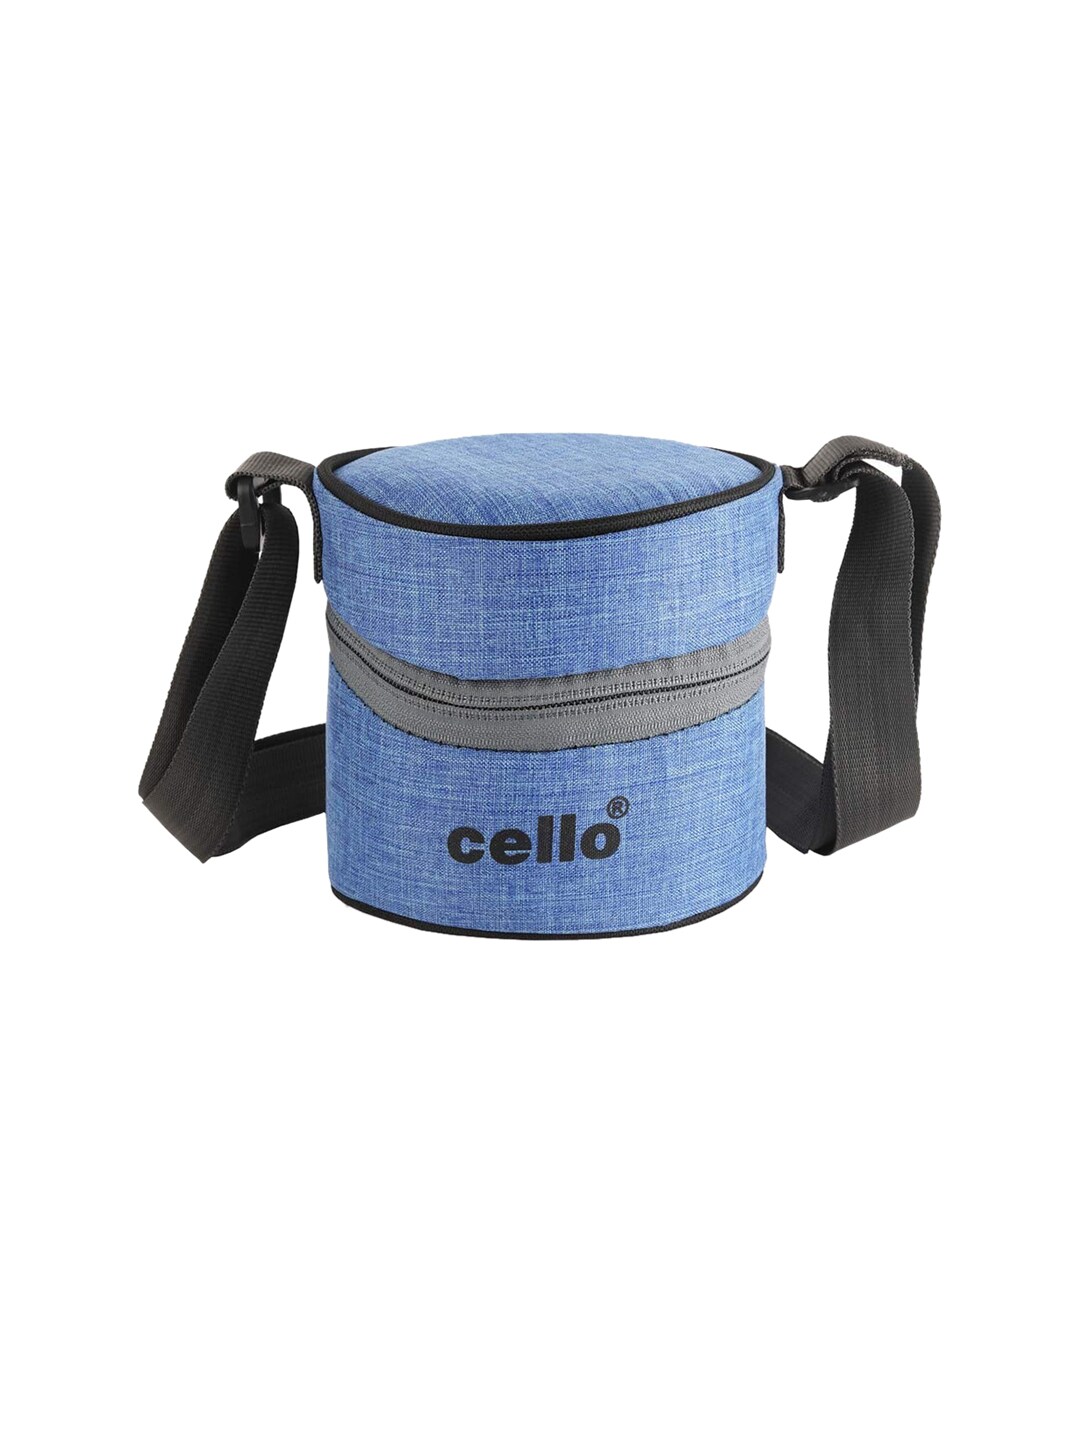 Cello Blue & Silver-Toned Solid Stainless Steel Lunch Box With Bag Price in India